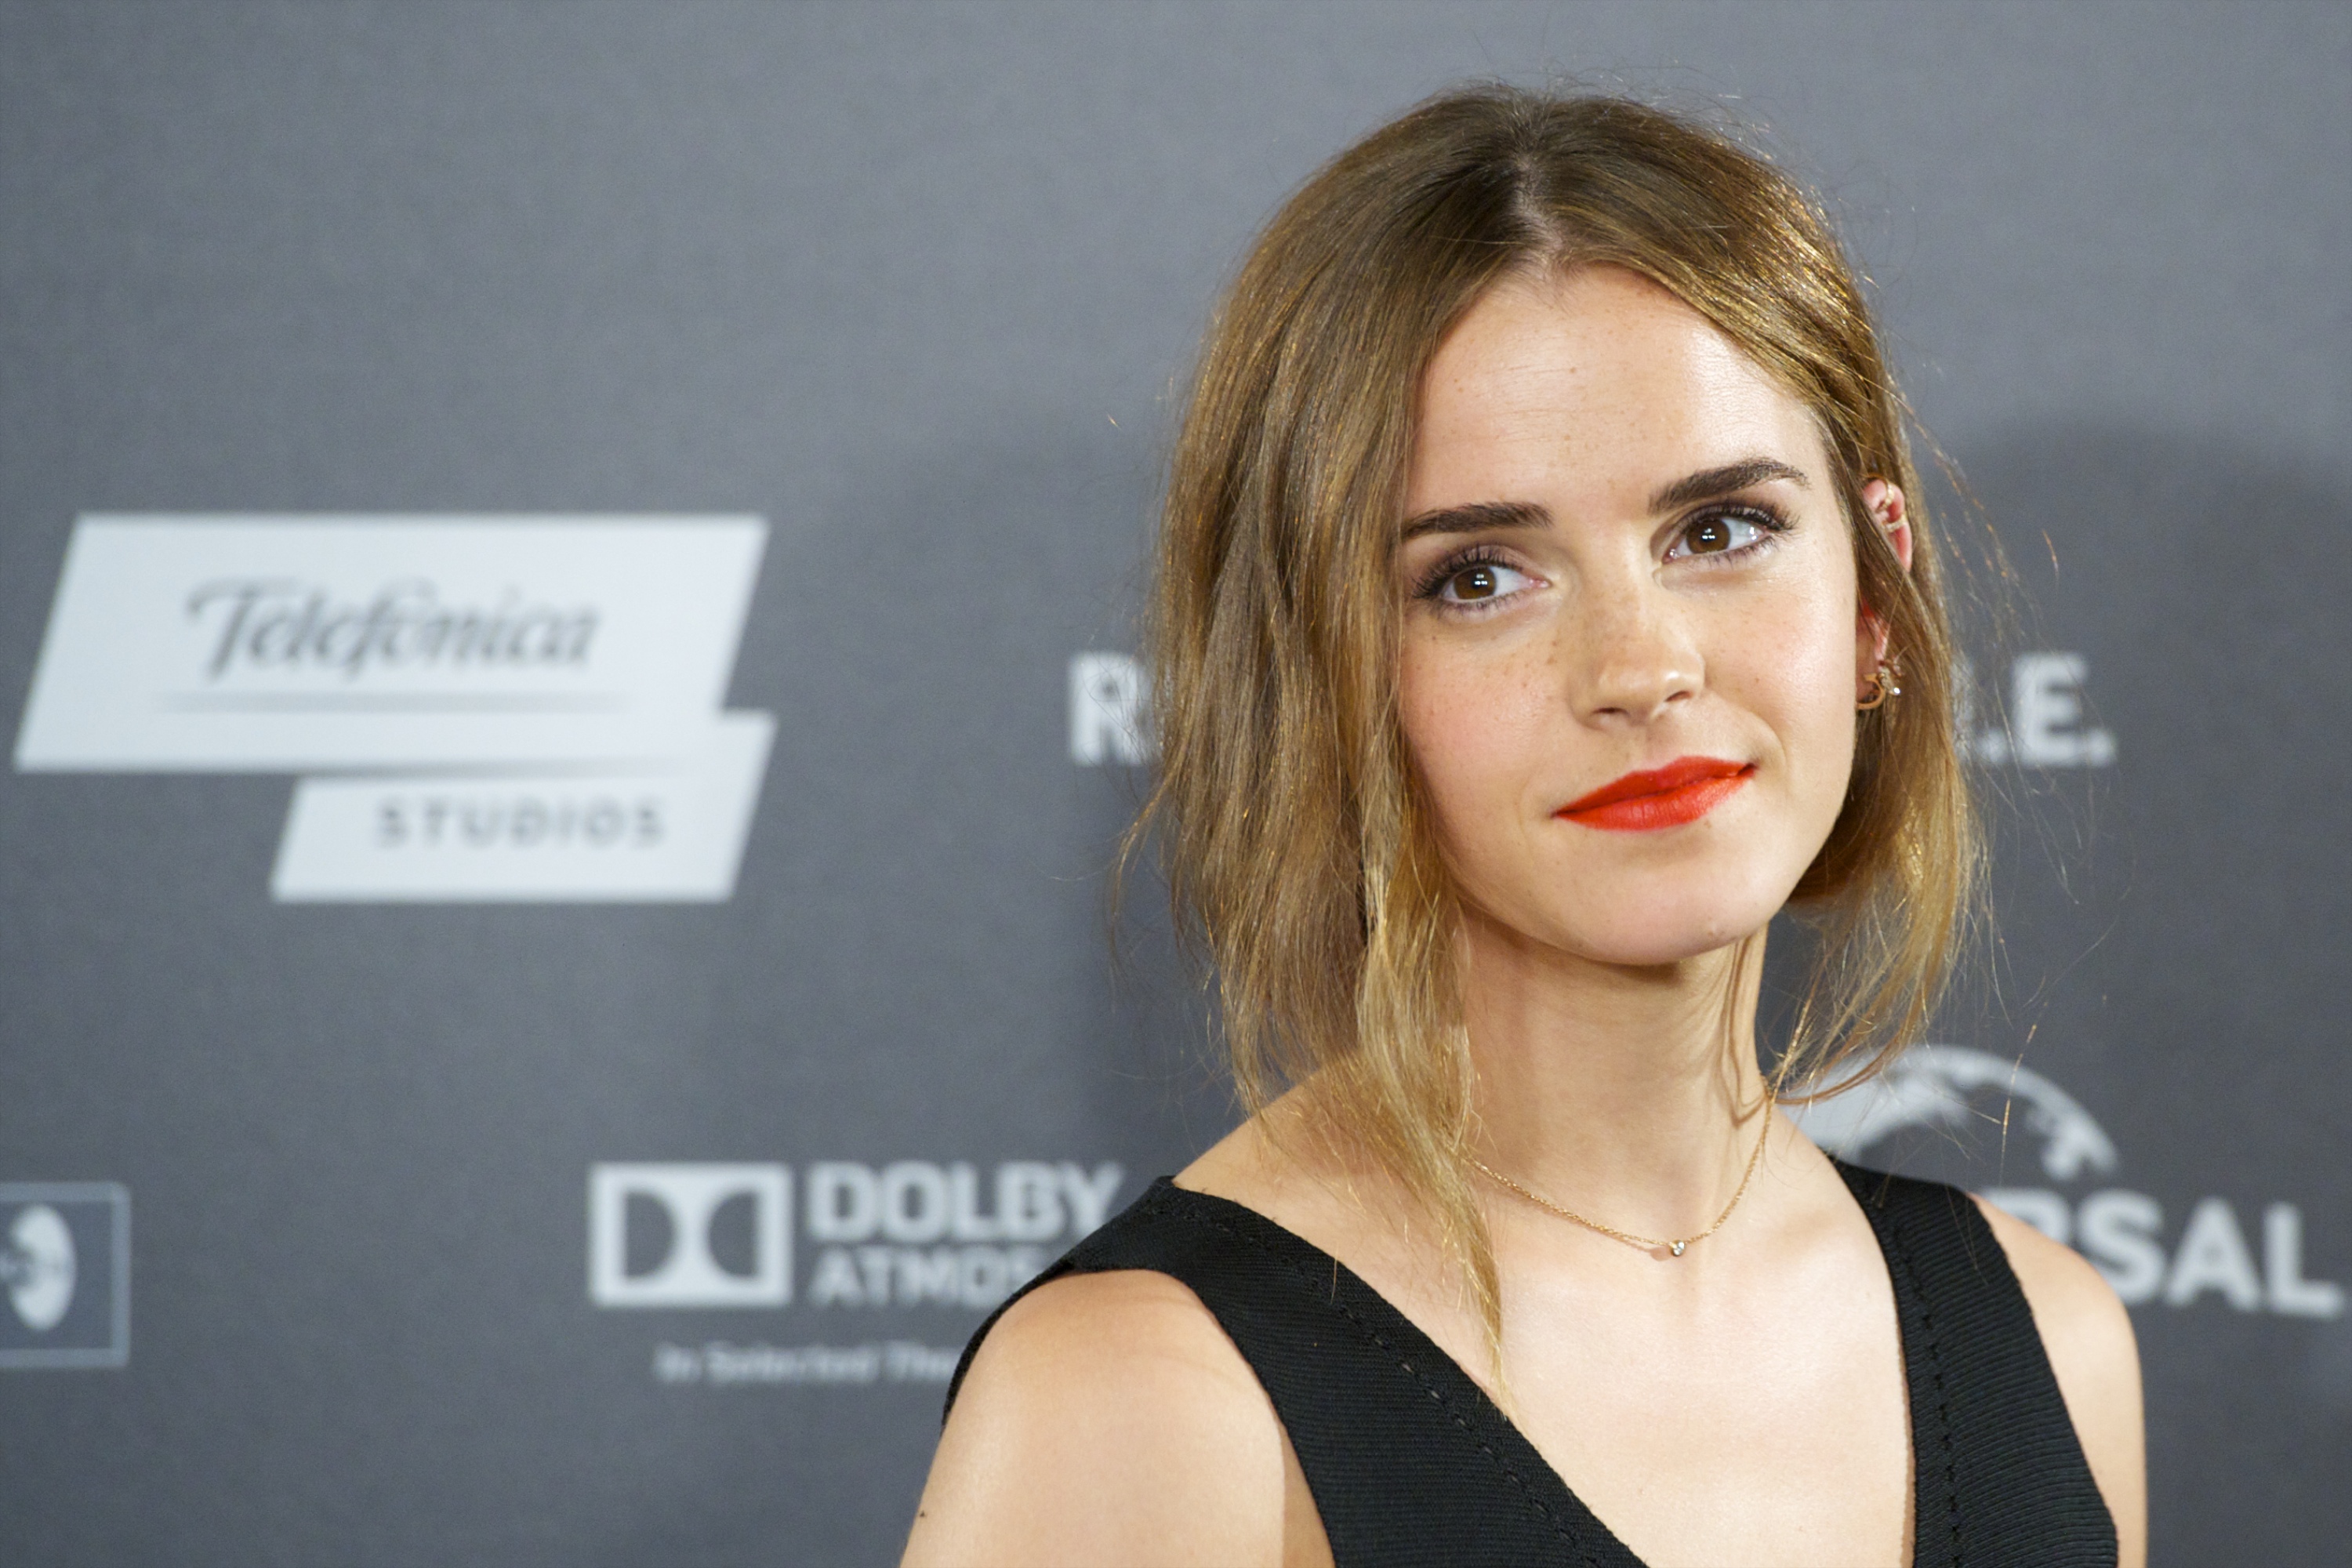 Emma Watson attends the 'Regression' photocall at Villamagna Hotel on Aug. 27, 2015 in Madrid, Spain. (Juan Naharro Gimenez—Getty Images)